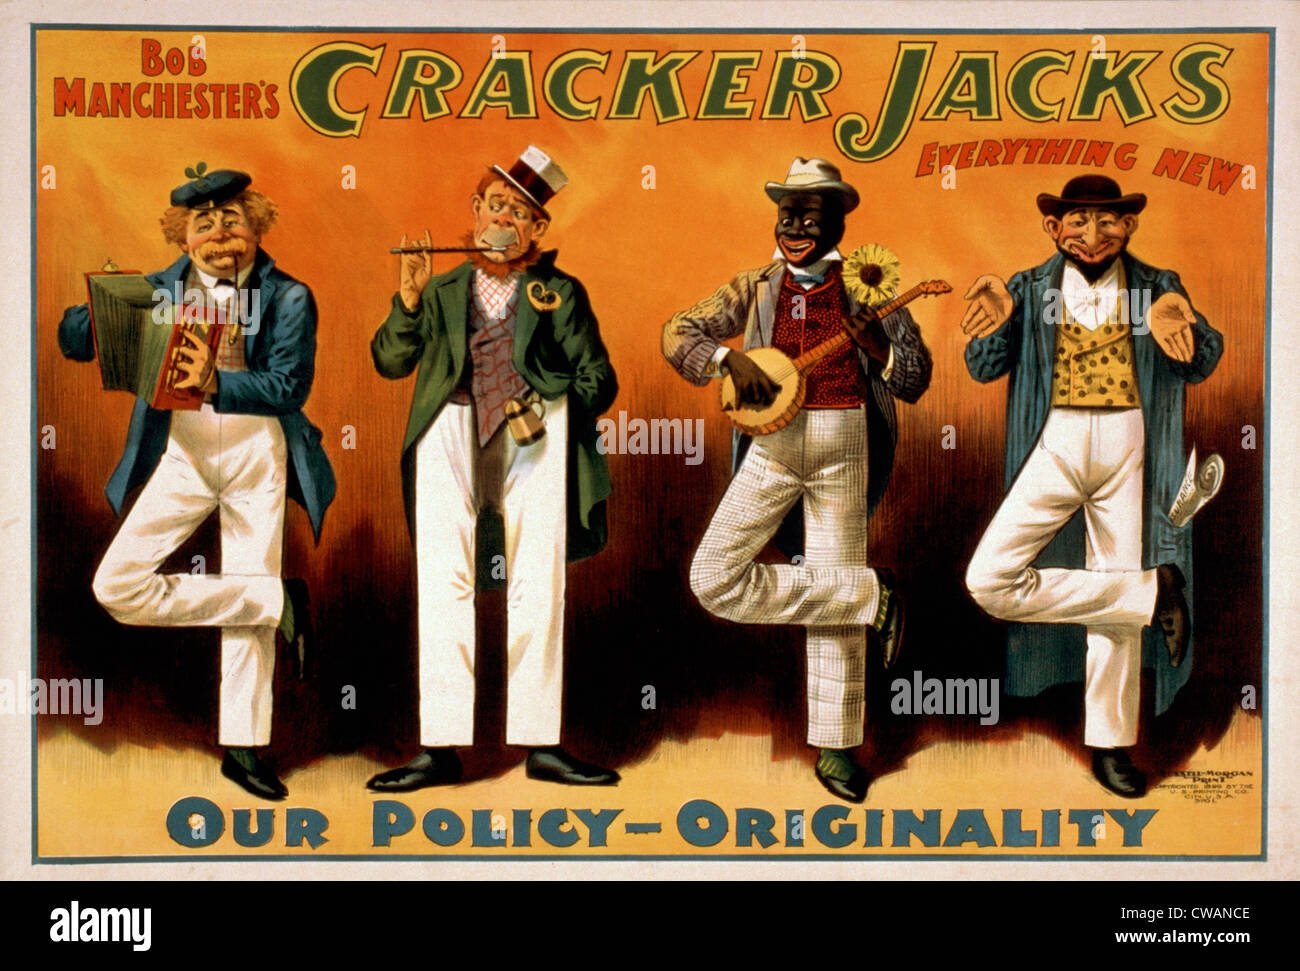 Poster for Bob Manchester's 'Cracker Jacks everything new vaudeville troupe.'  Depicted actors clearly represent different Stock Photo